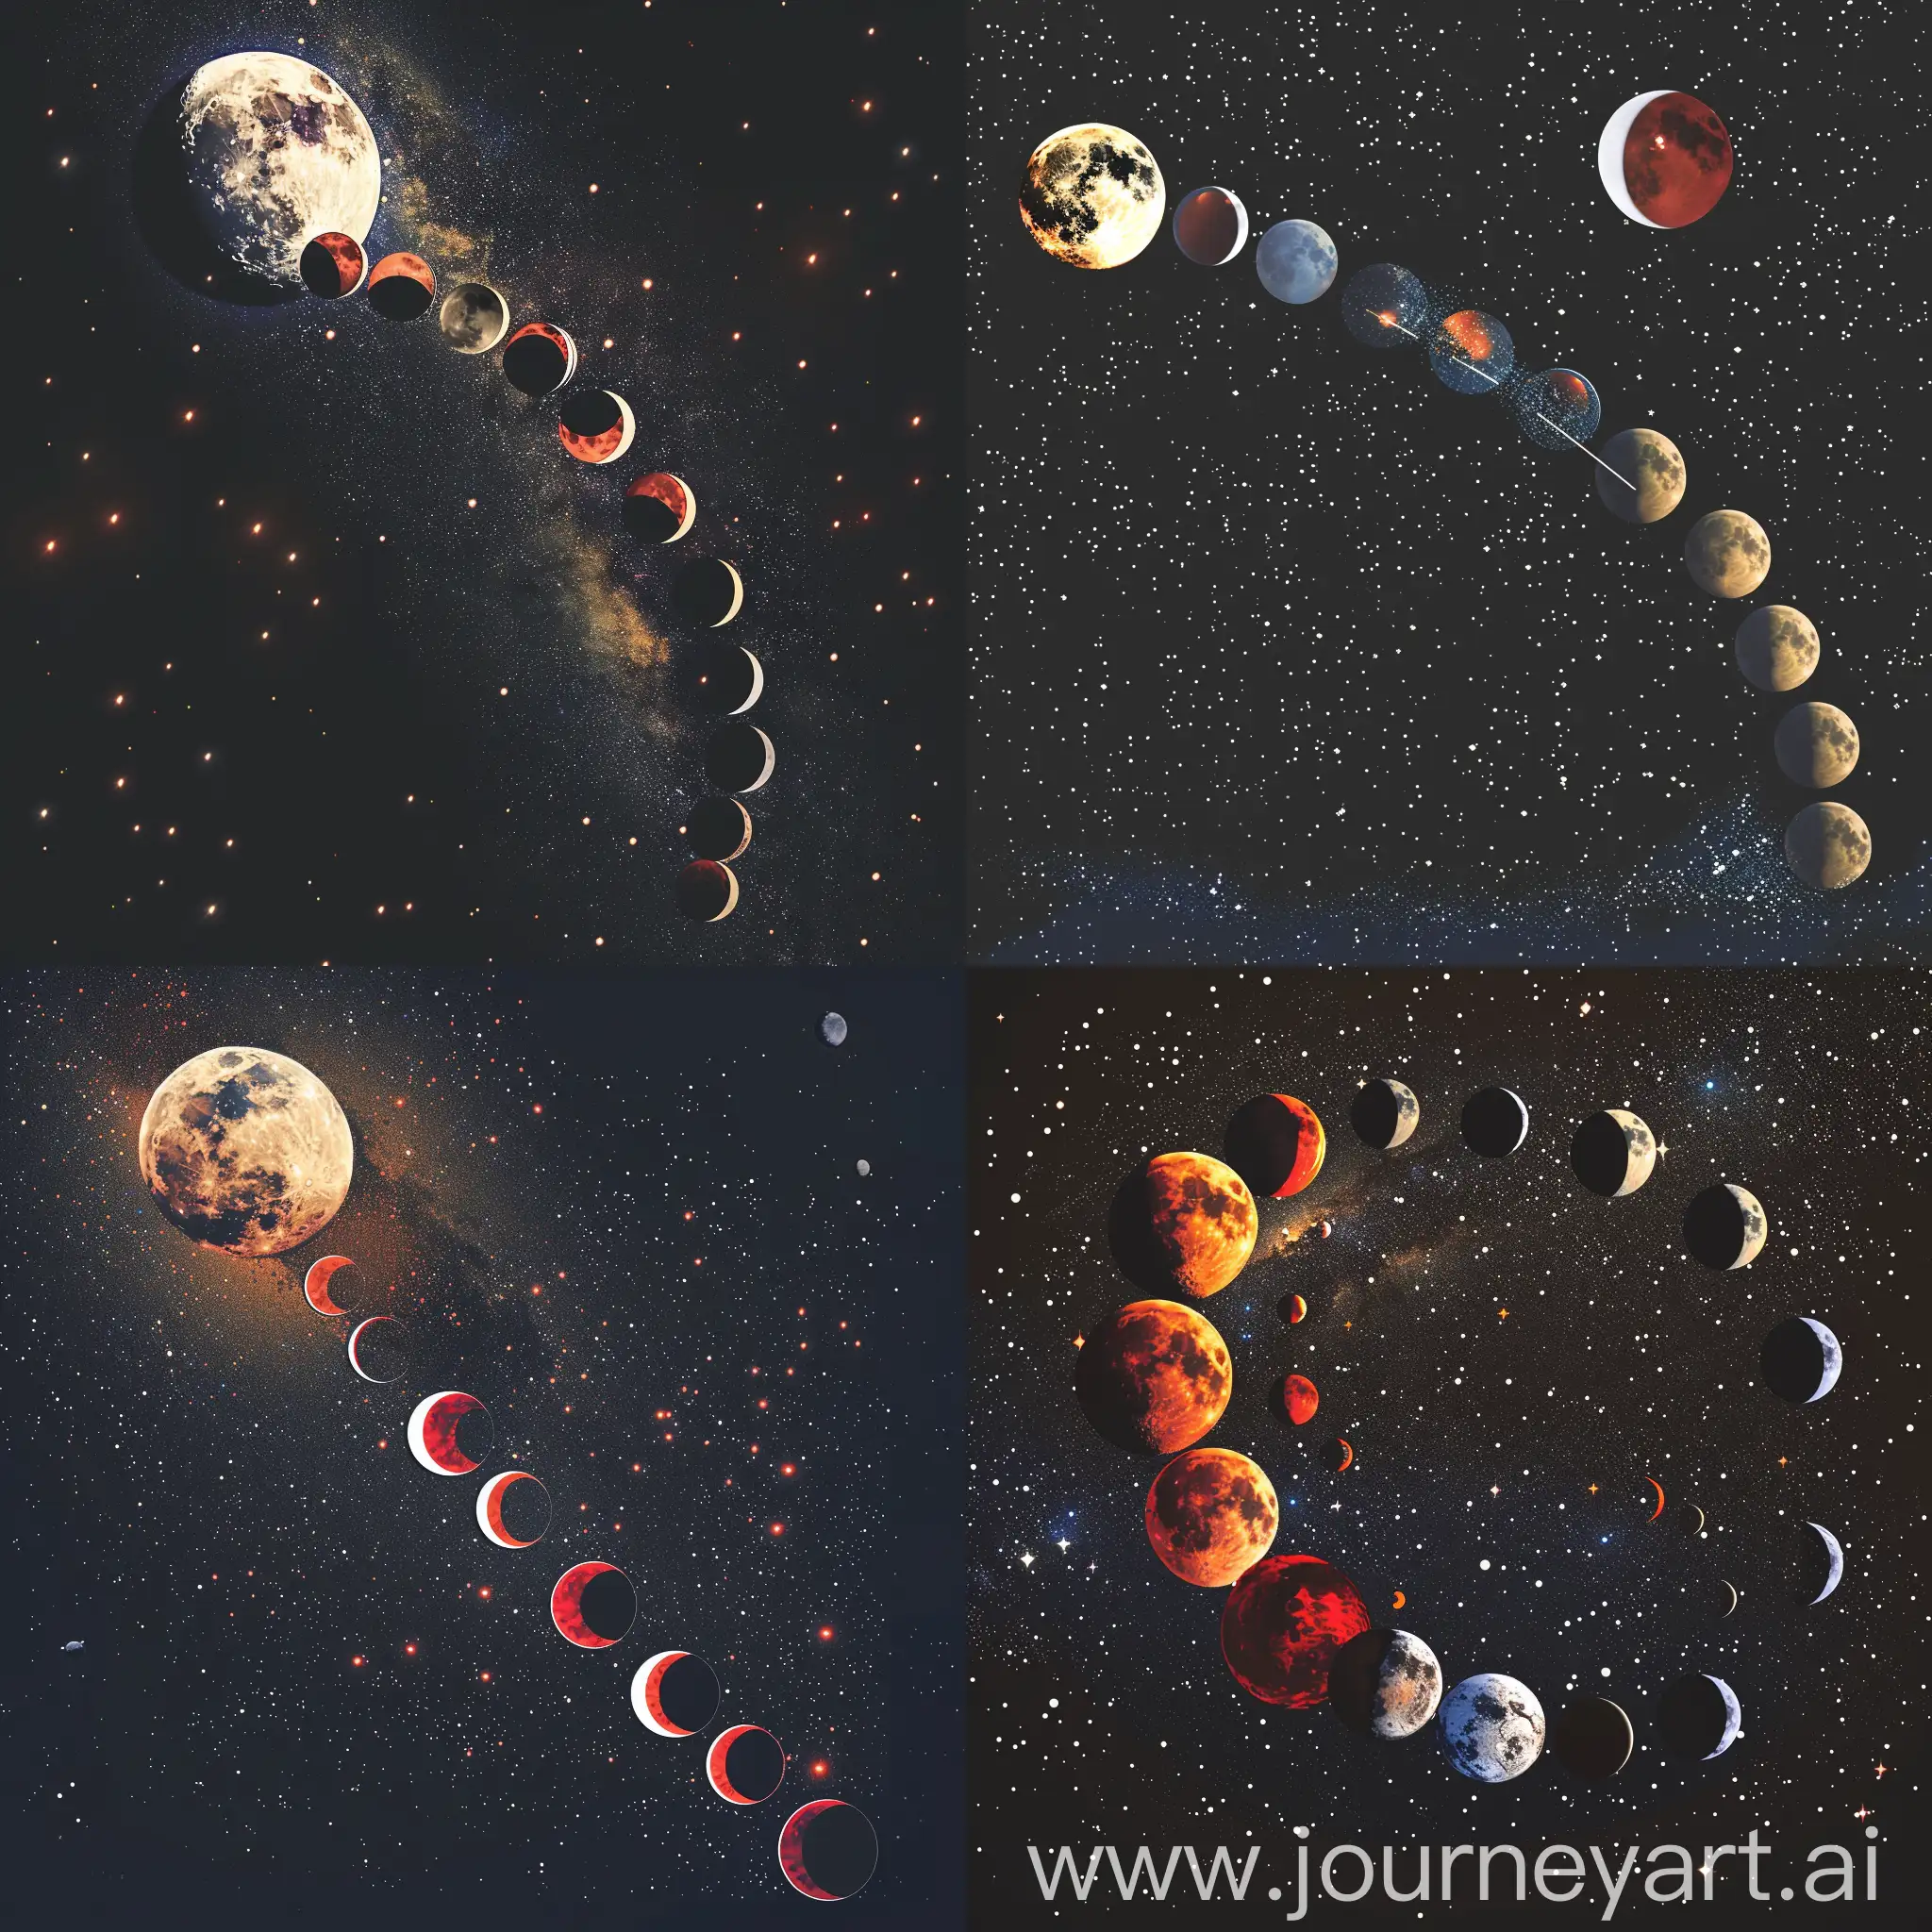 Celestial-Dance-Lunar-and-Solar-Eclipse-Animation-in-Space